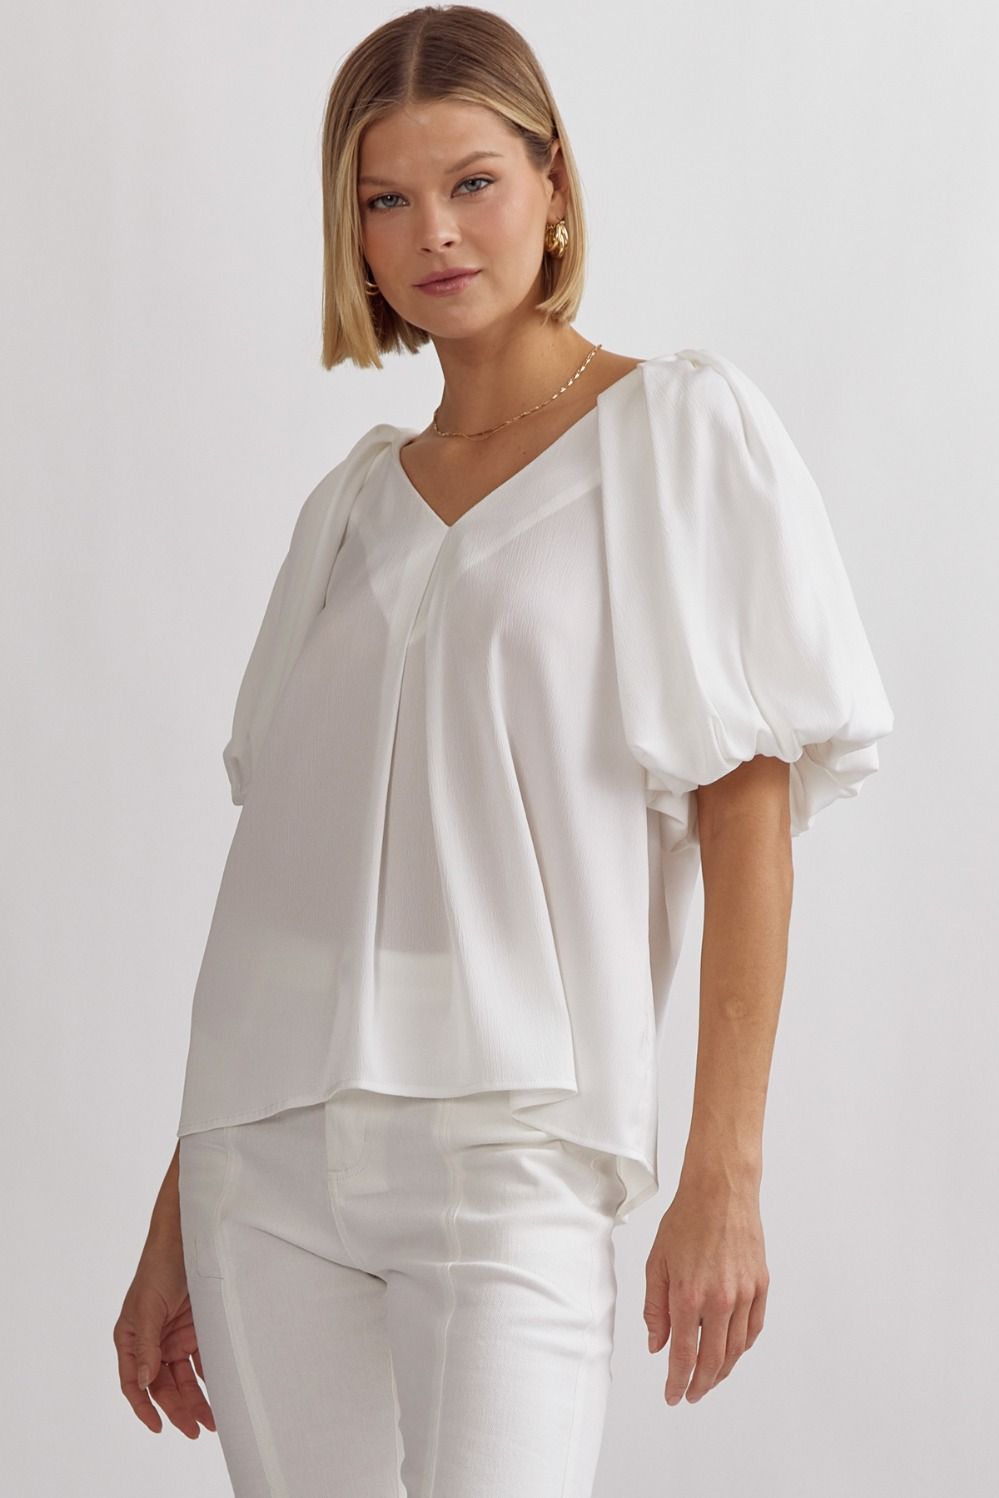 ENTRO INC Women's Top OFFWHITE / S Solid Satin V-Neck Bubble Sleeve Top || David's Clothing T21321